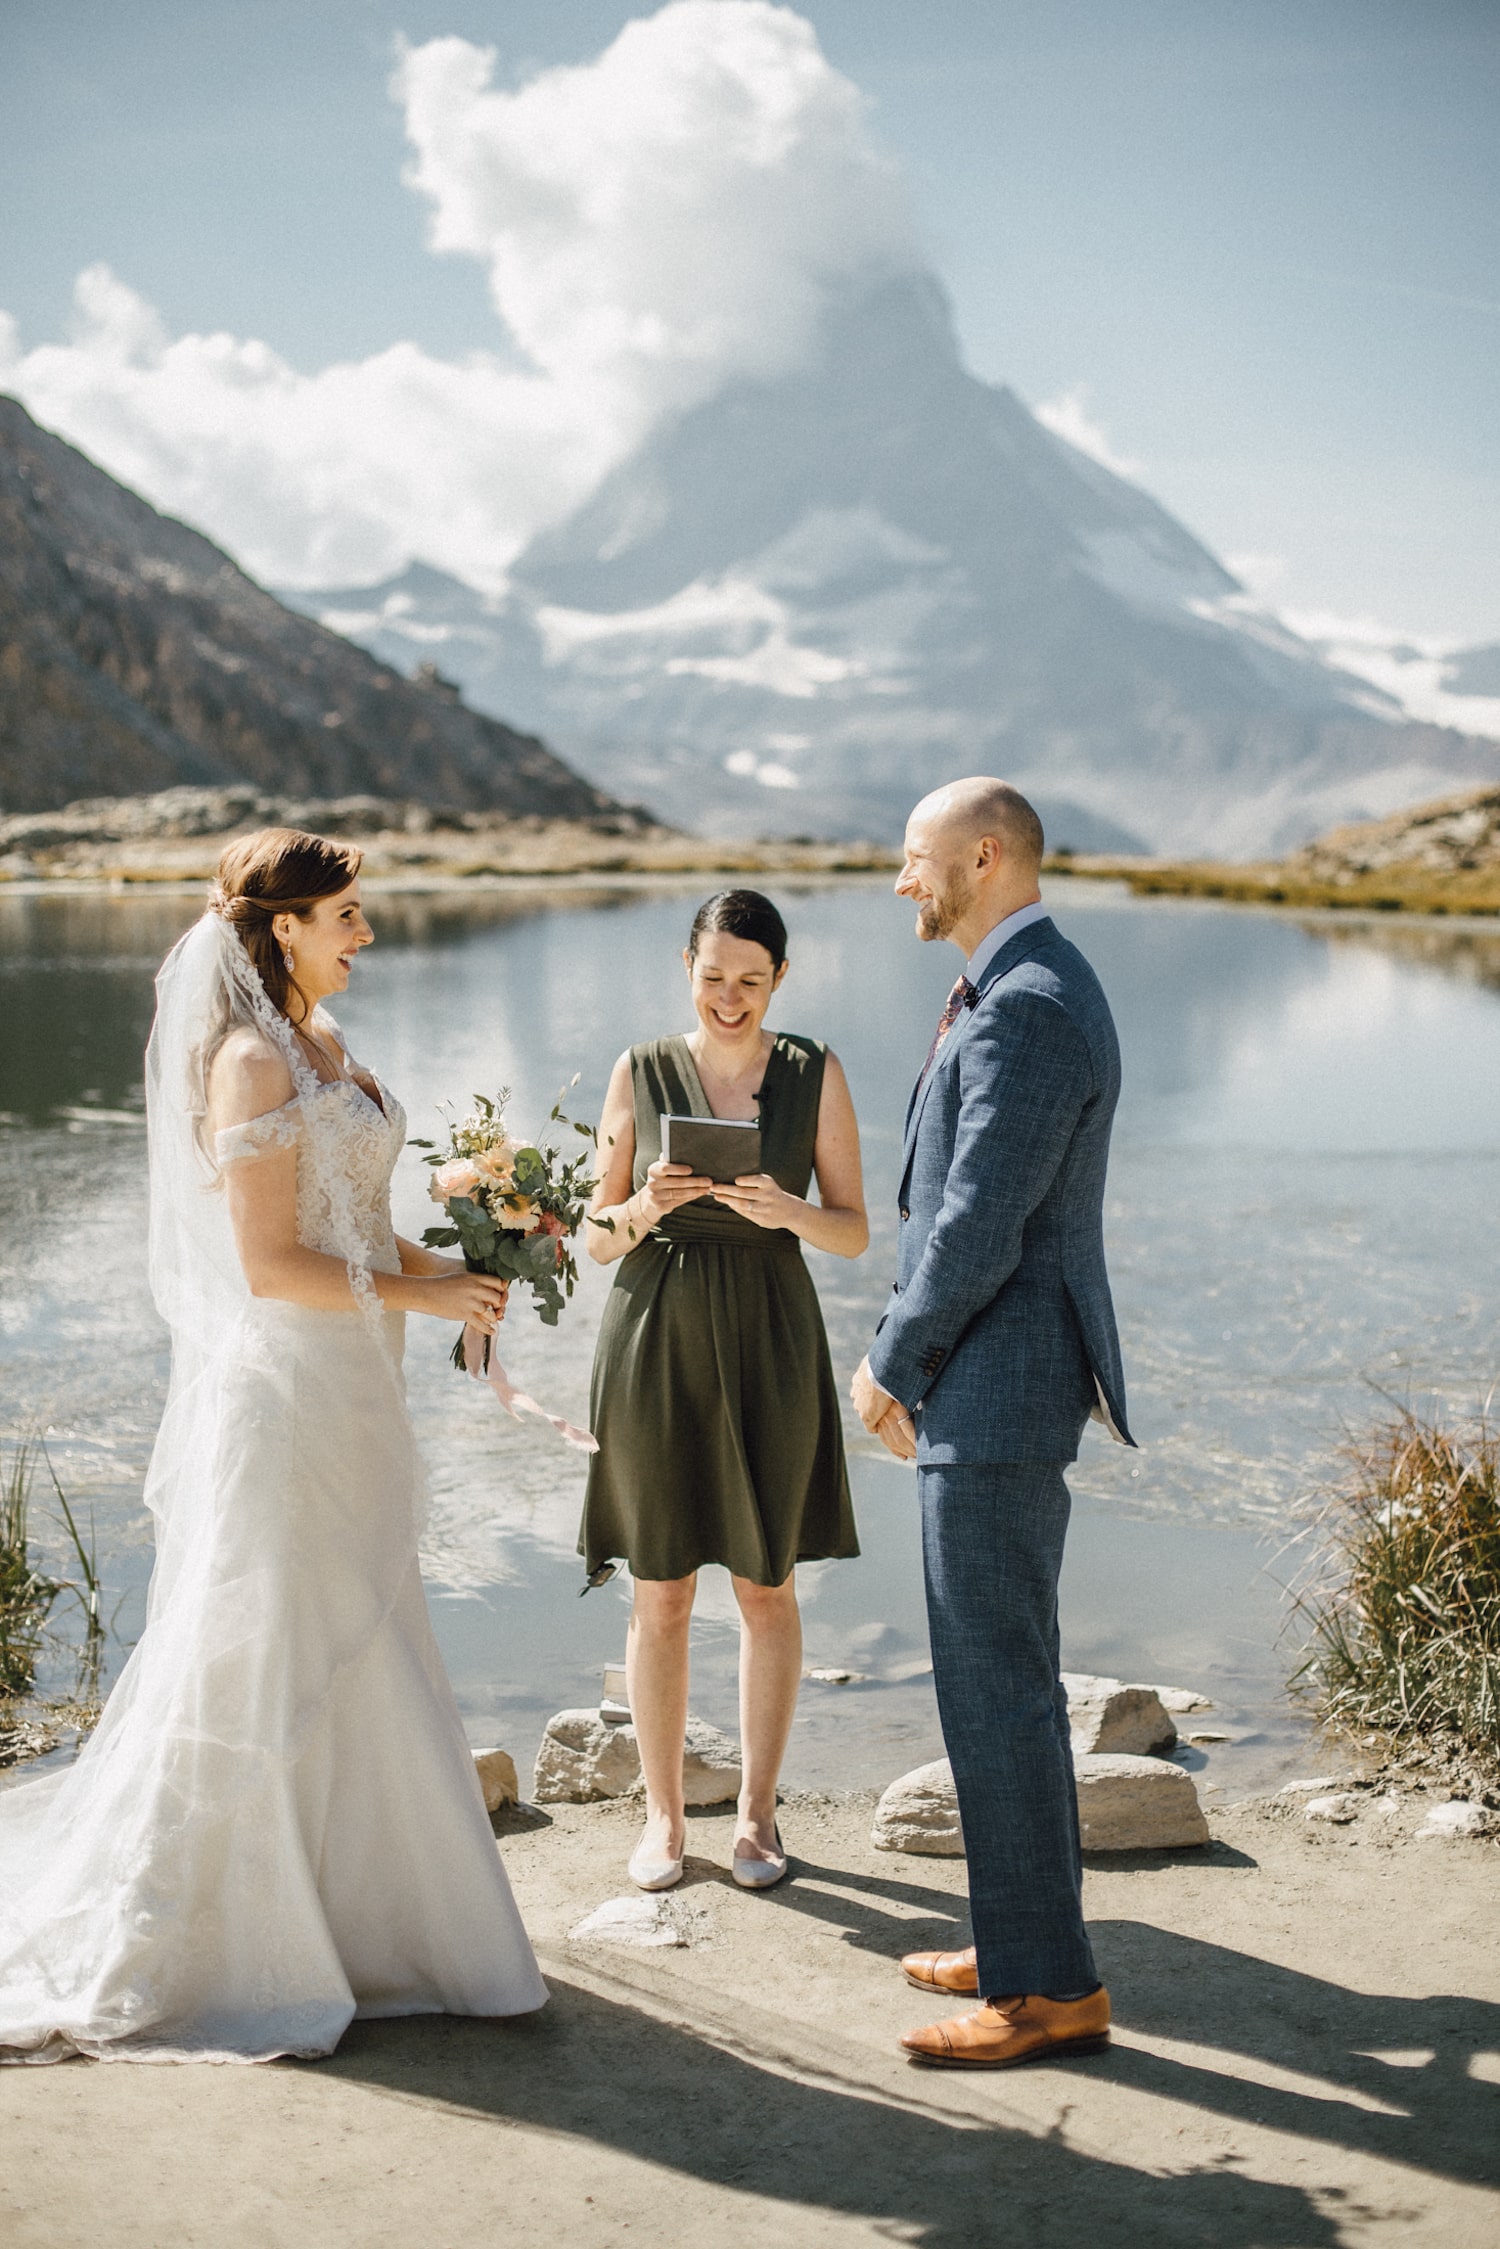 getting married in front of the Matterhorn during an intimate ceremony